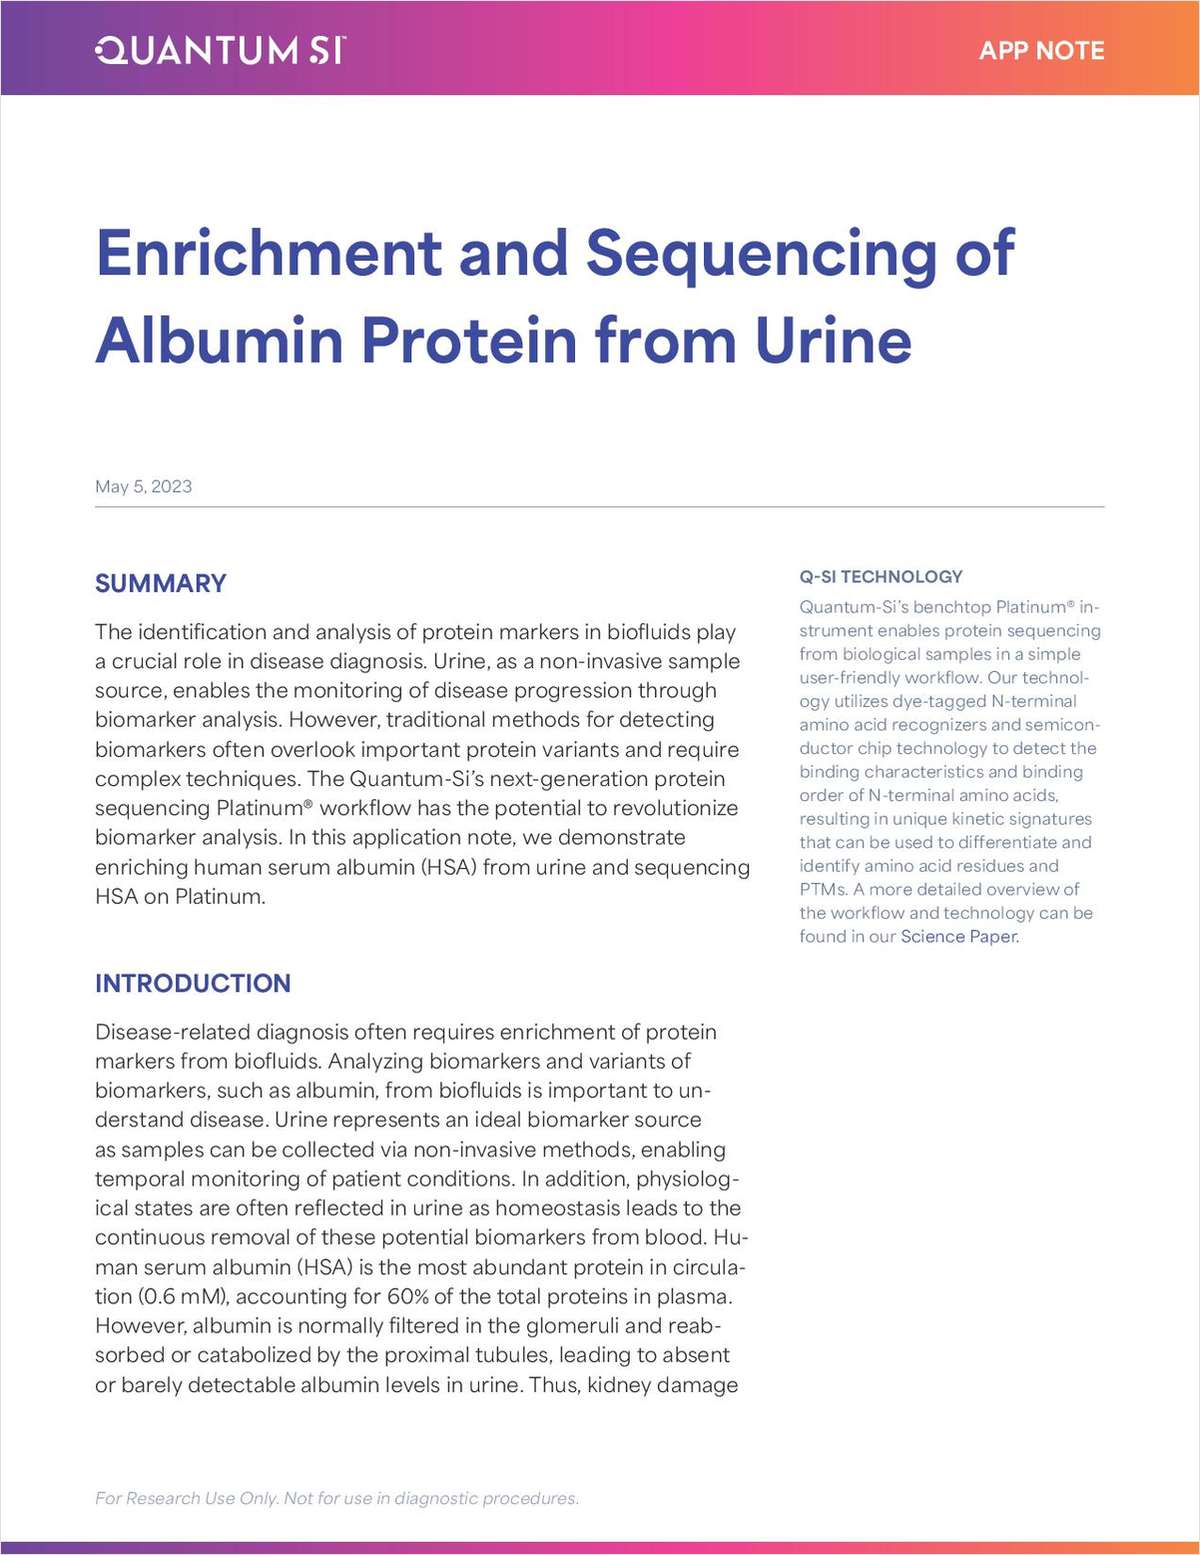 Enrichment and Sequencing of Albumin Protein from Urine